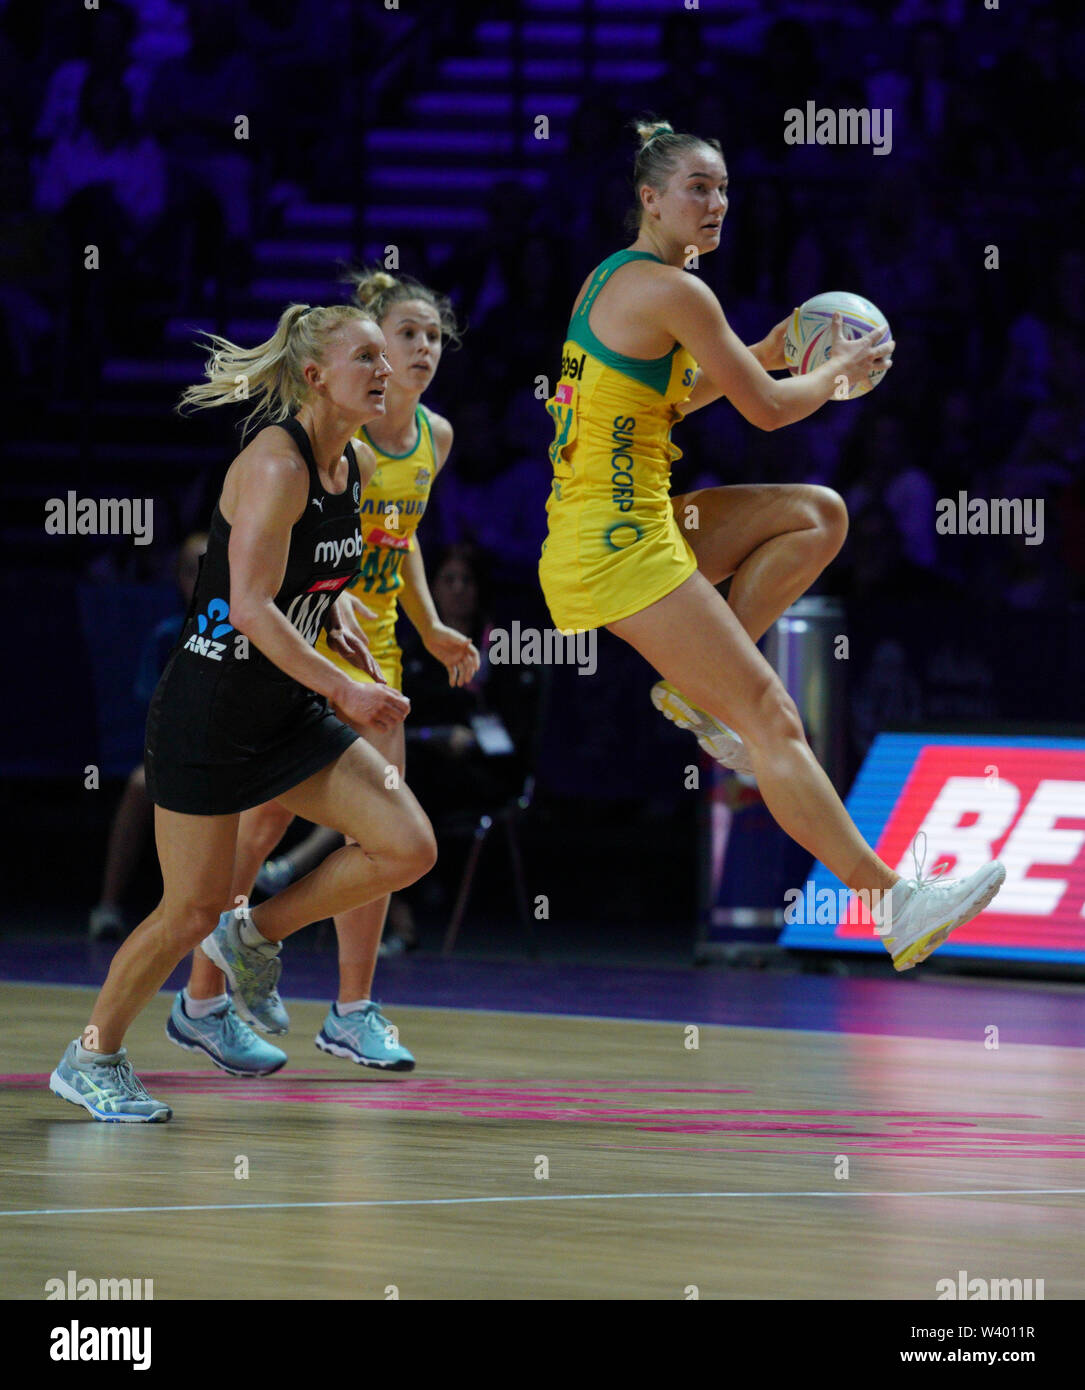 Courtney Bruce (AUS) in action during Vitality Netball World Cup 2019 at M&S Bank Arena, Liverpool, United Kingdom.Australia beat New Zealand: 50-49 Stock Photo